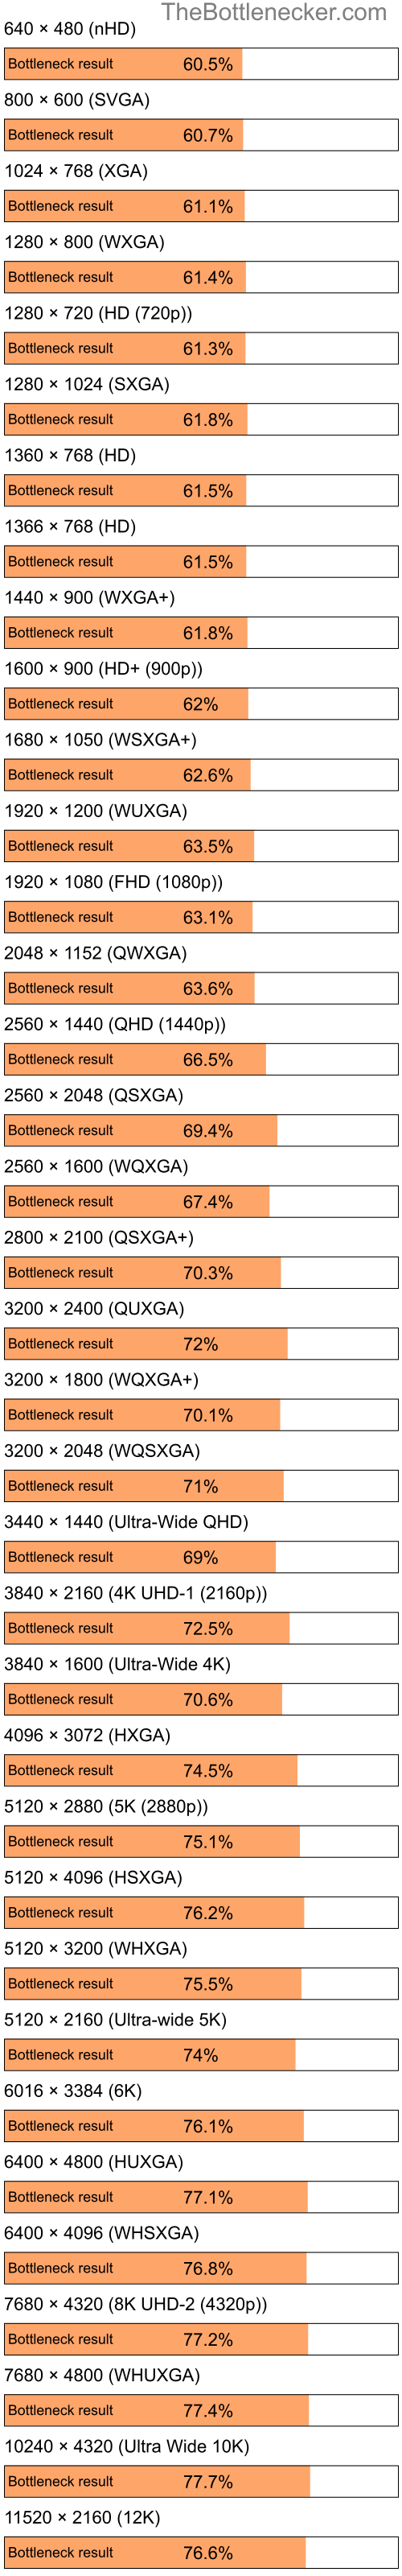 Bottleneck results by resolution for Intel Pentium 4 and AMD Mobility Radeon HD 2400 XT in General Tasks